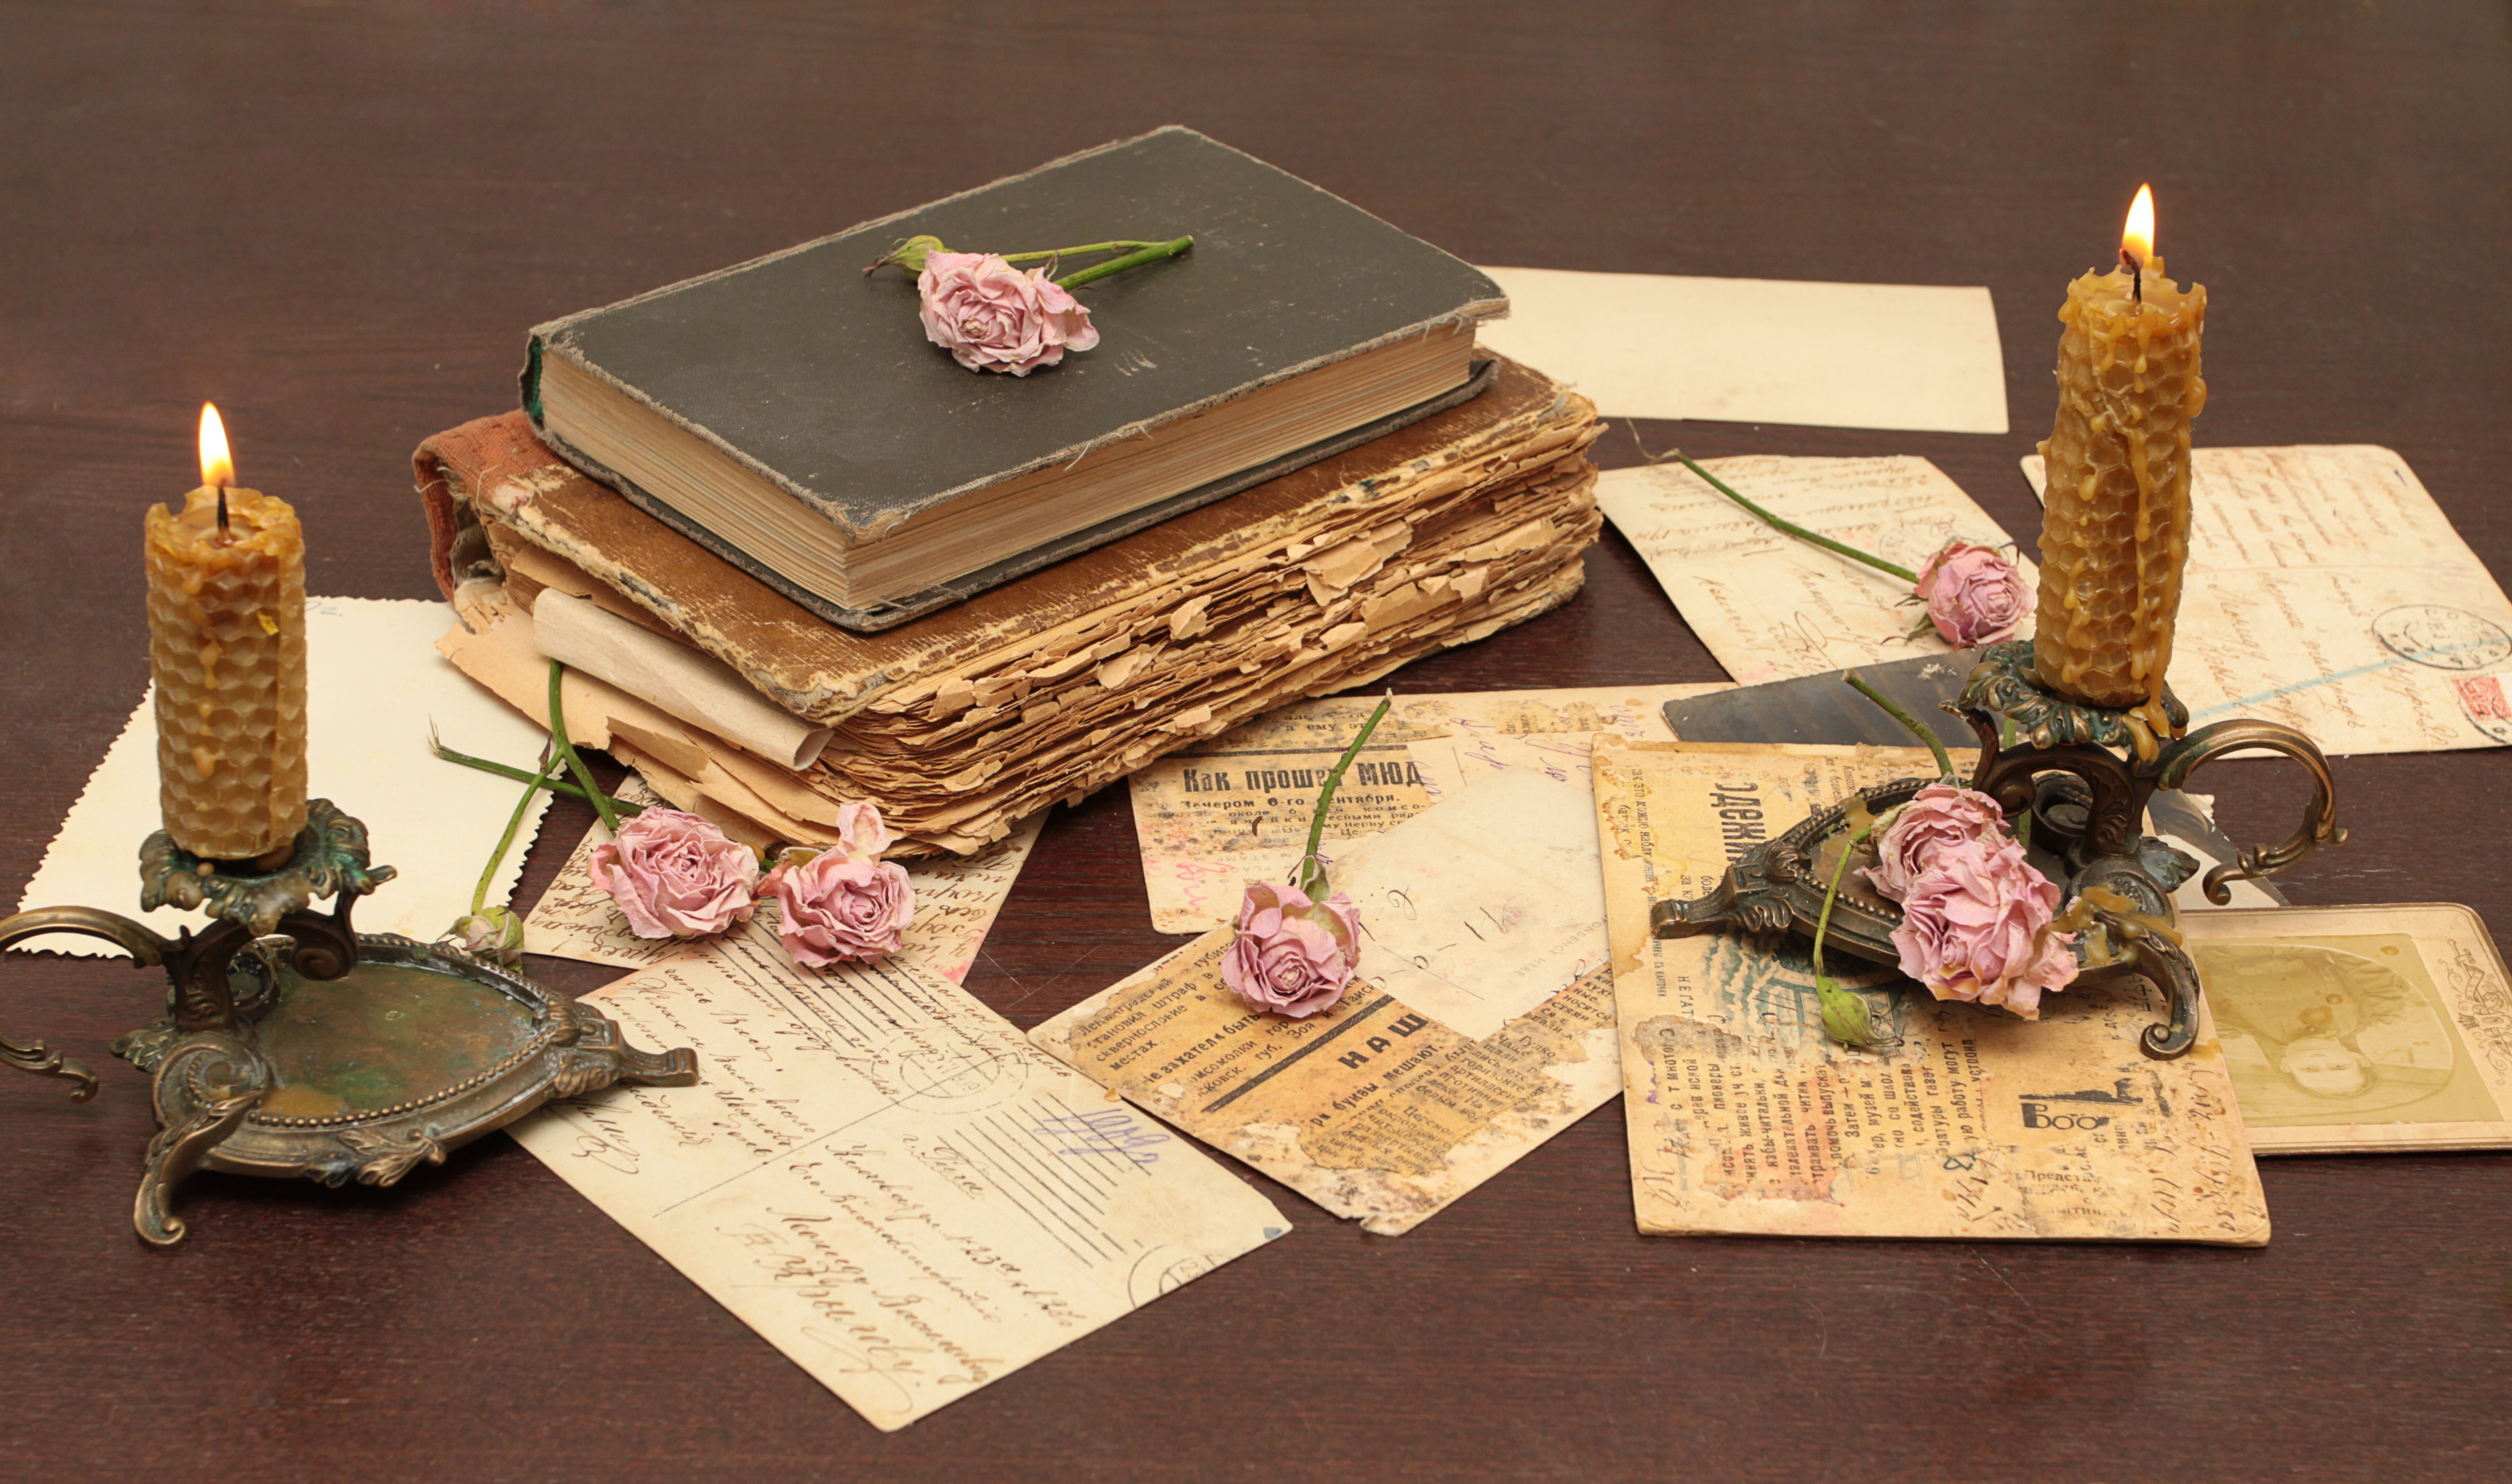 miscellaneous, old, vintage, miscellanea, books, flowers, roses, candles, postcards, table, paper, letters, candlesticks images